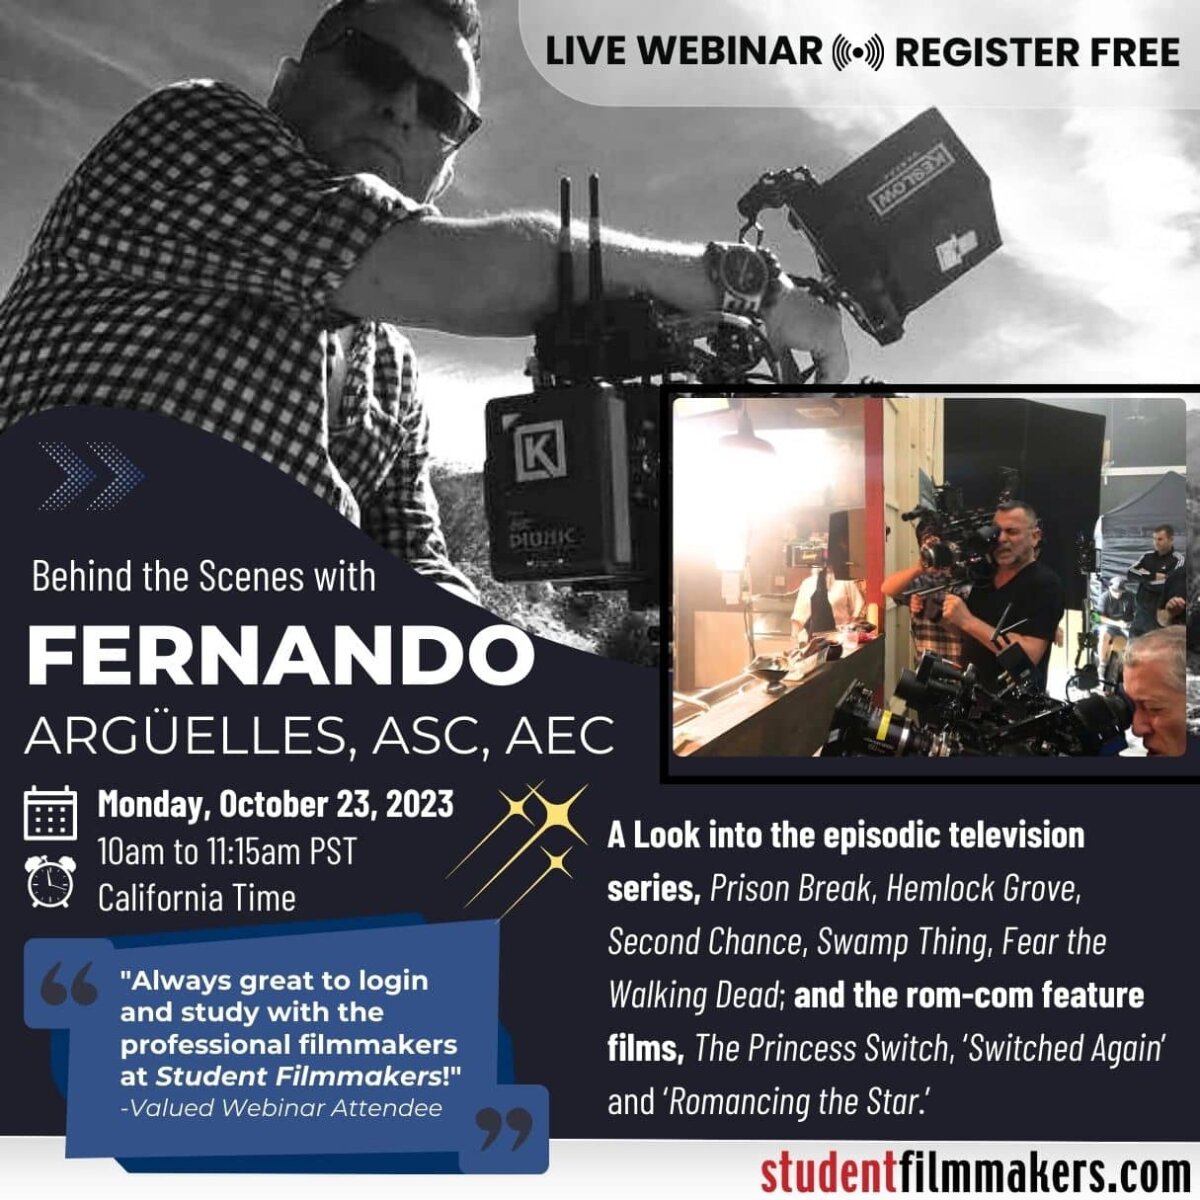 Live Webinar | Behind the Scenes with Fernando Argüelles ASC, AEC hosted by StudentFilmmakers.com